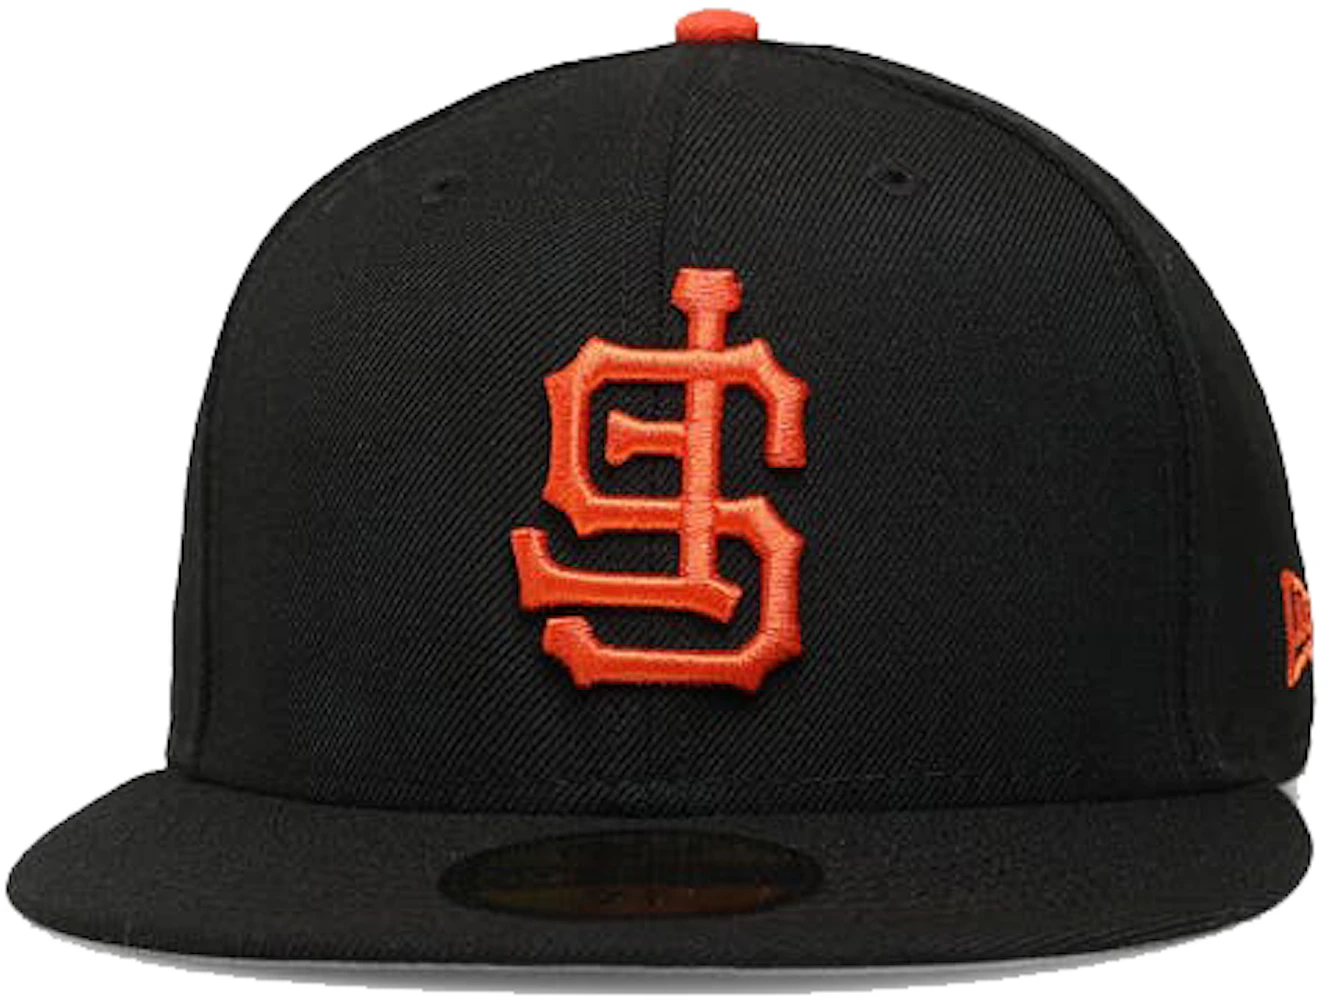 San Fransico' Giants hats sell out